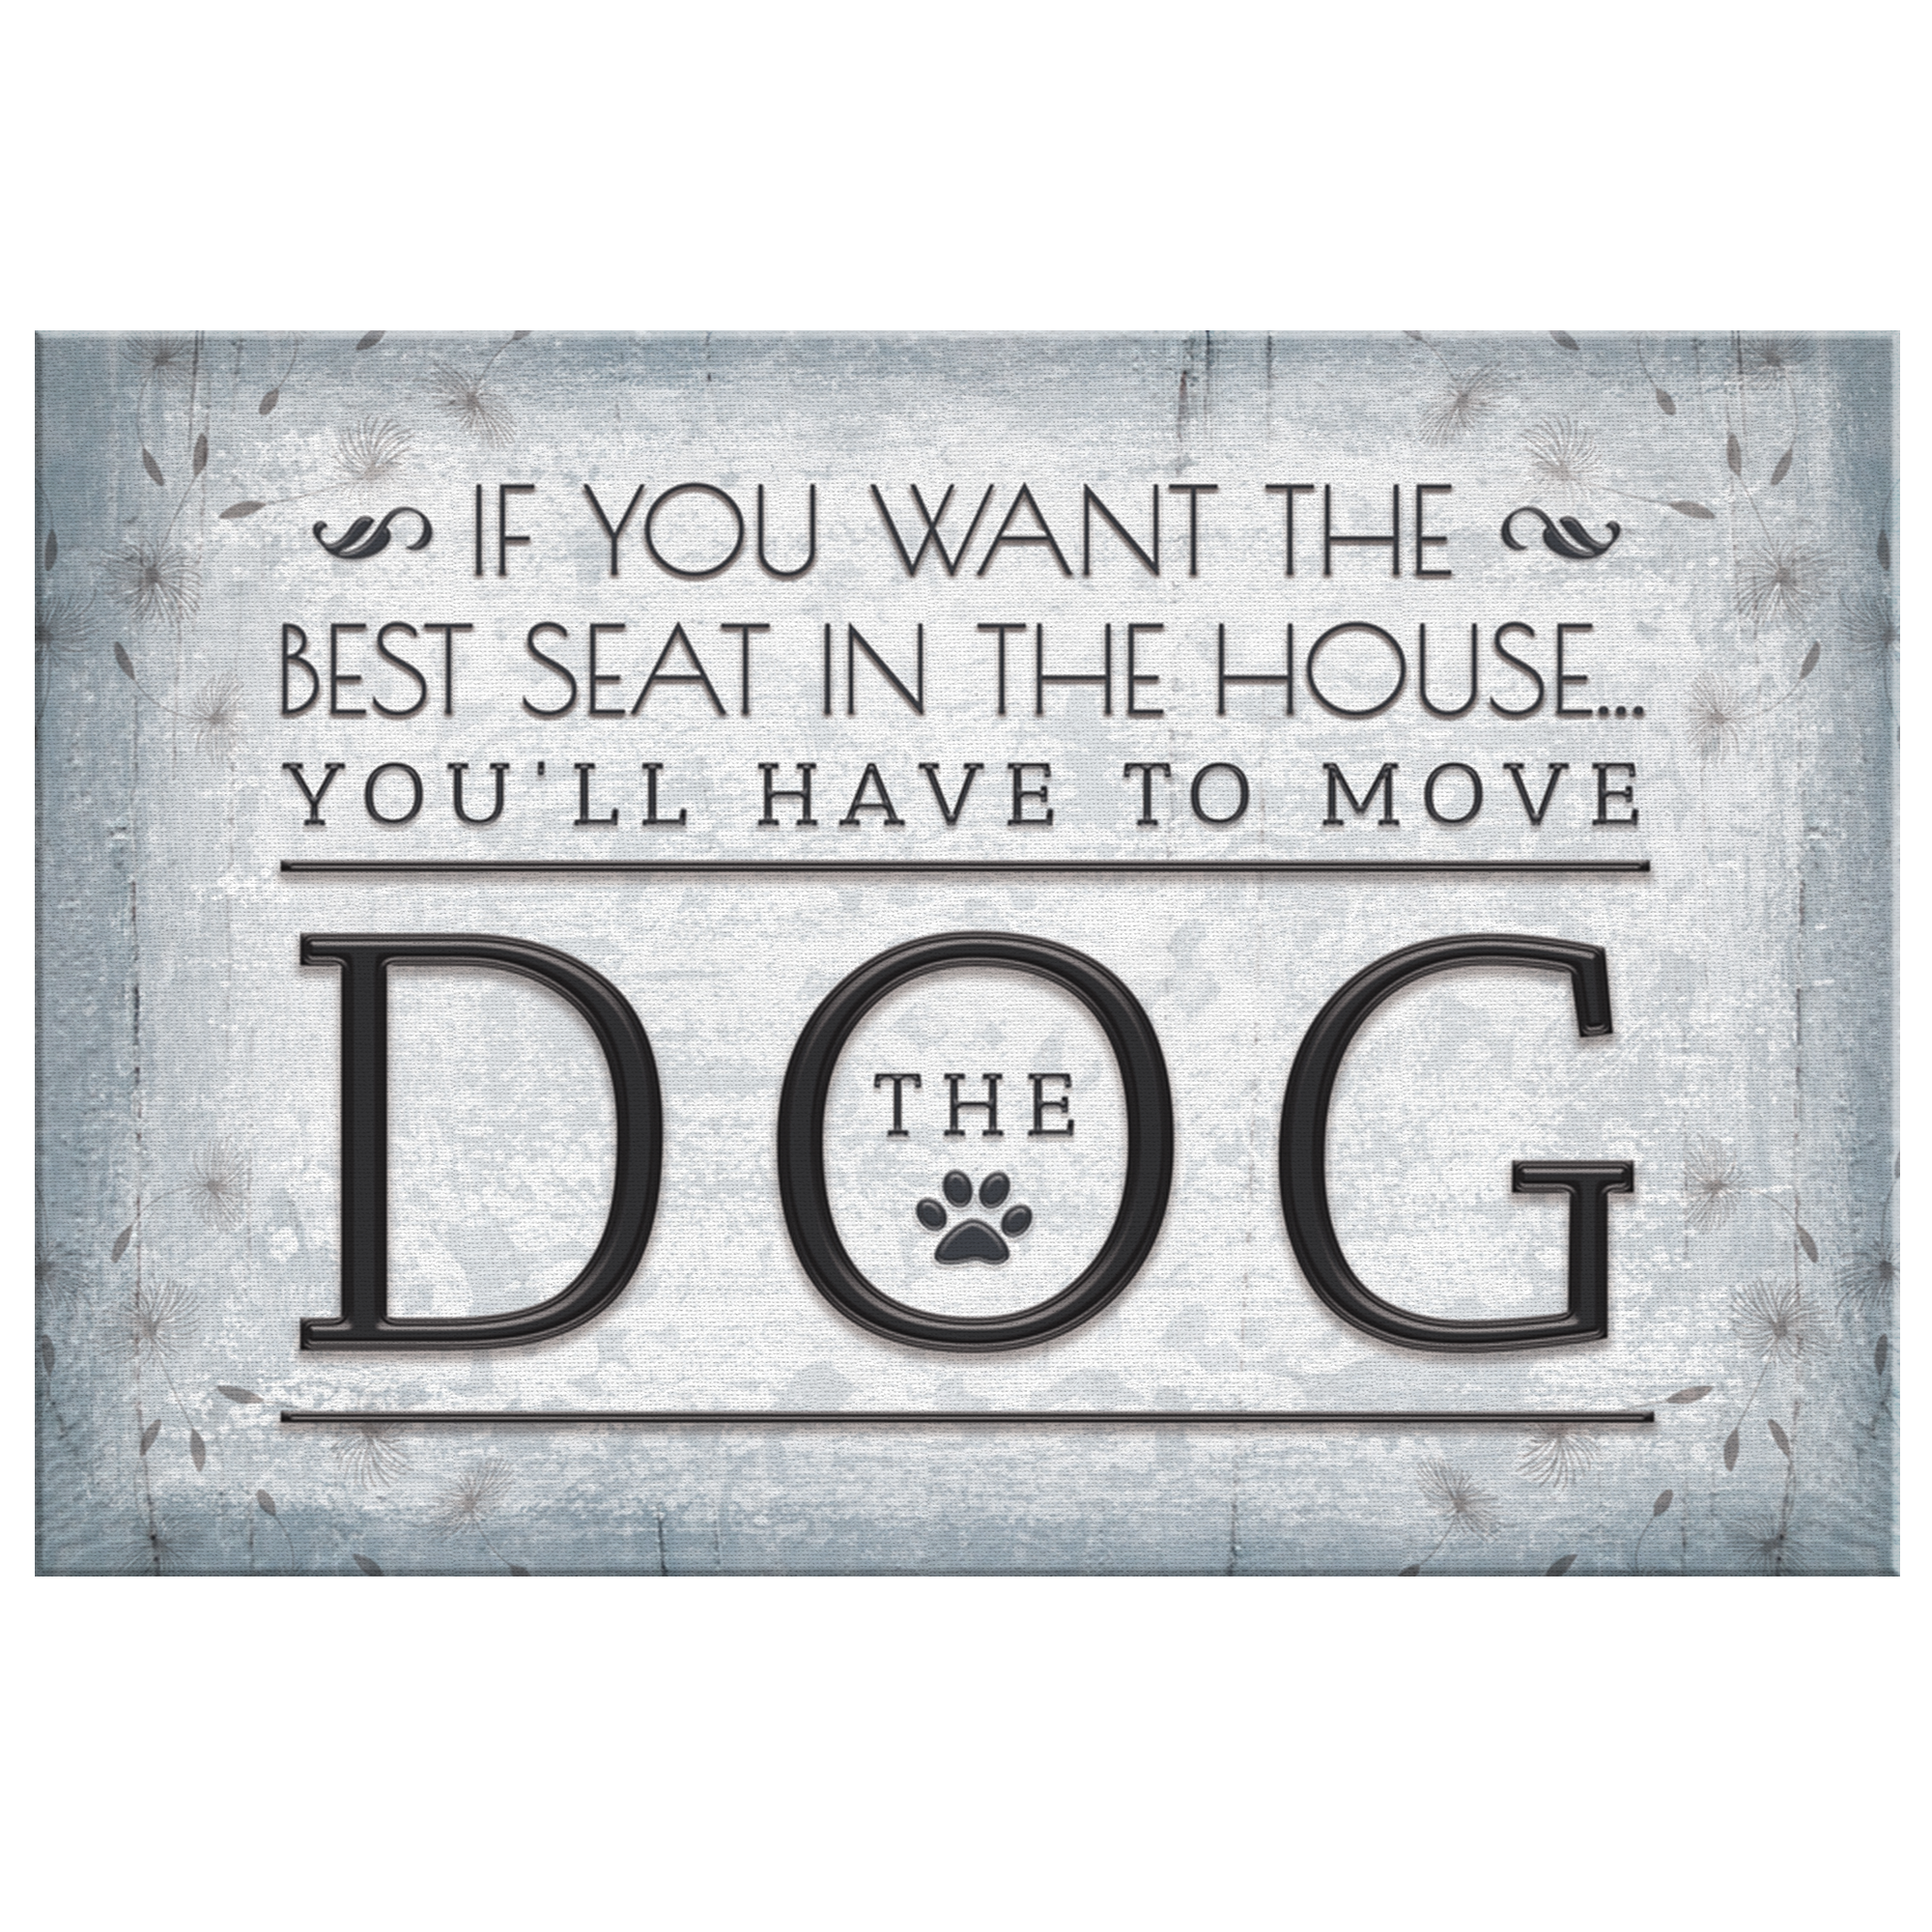 "Want The Best Seat In The House -  Move The Dog" Premium Canvas Wall Art